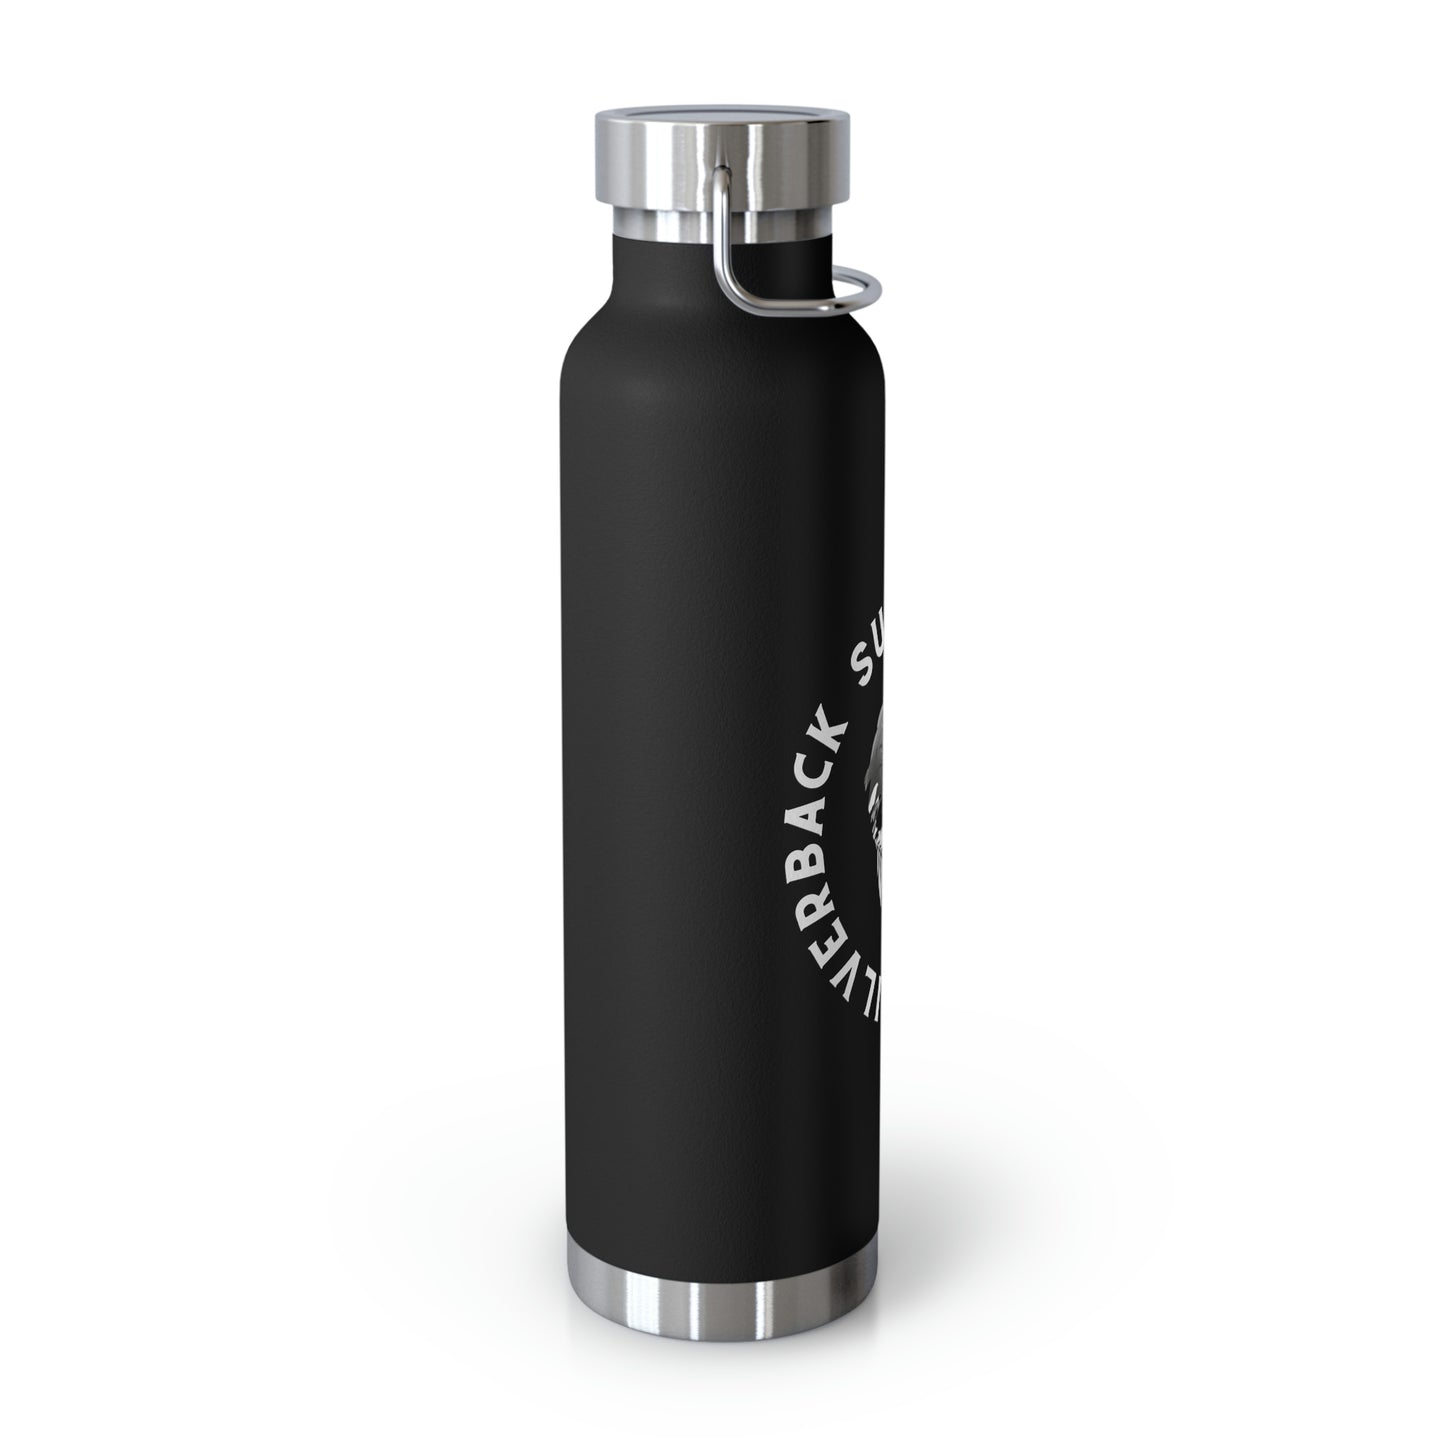 Silverback Submission Tactics Copper Vacuum Insulated Bottle, 22oz